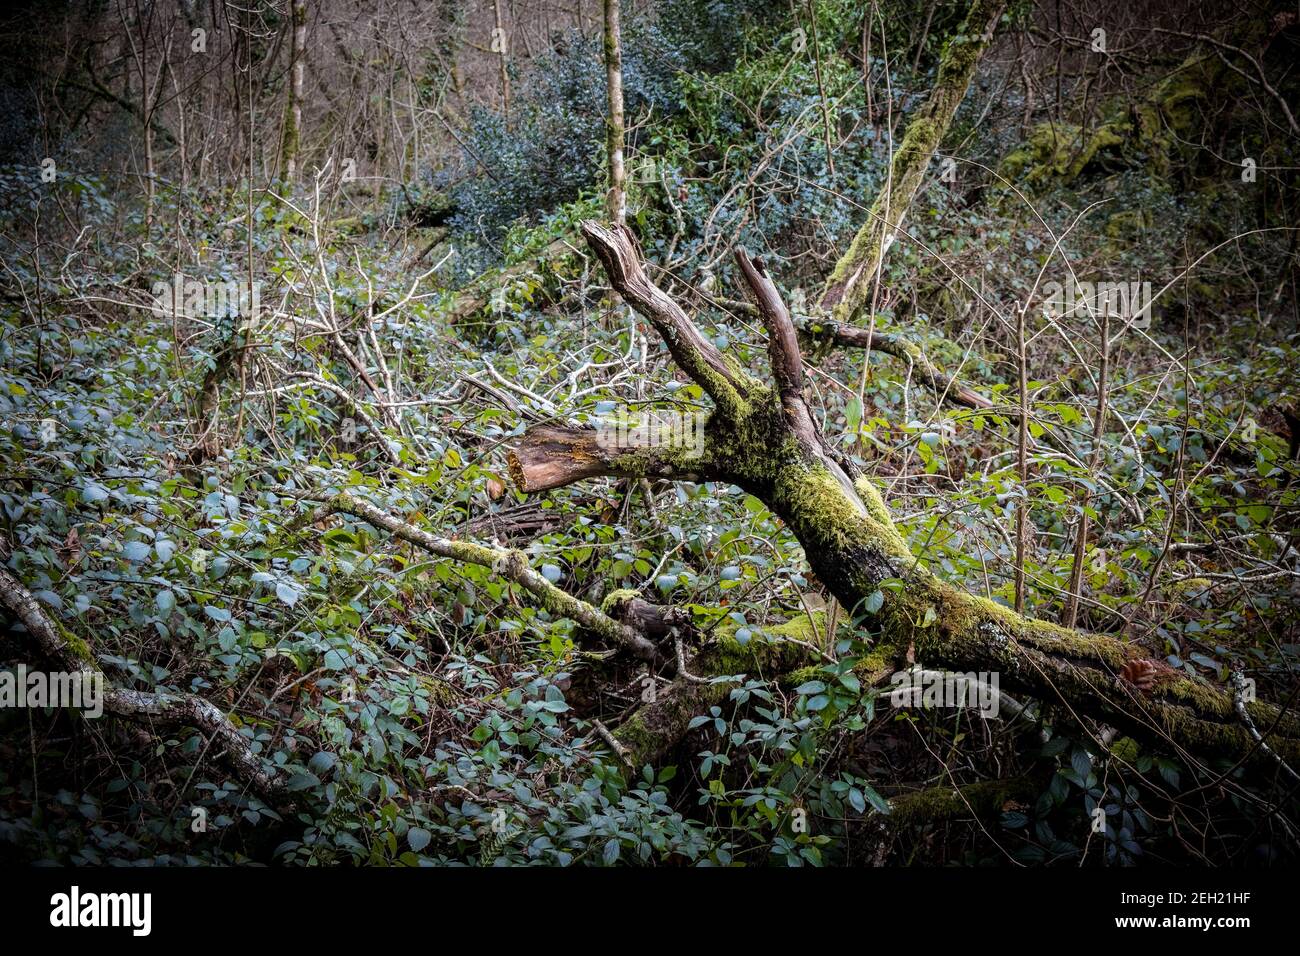 Tangled undergrowth in the atmospheric Metha Woods in Lappa Valley near St Newlyn East in Cornwall. Stock Photo